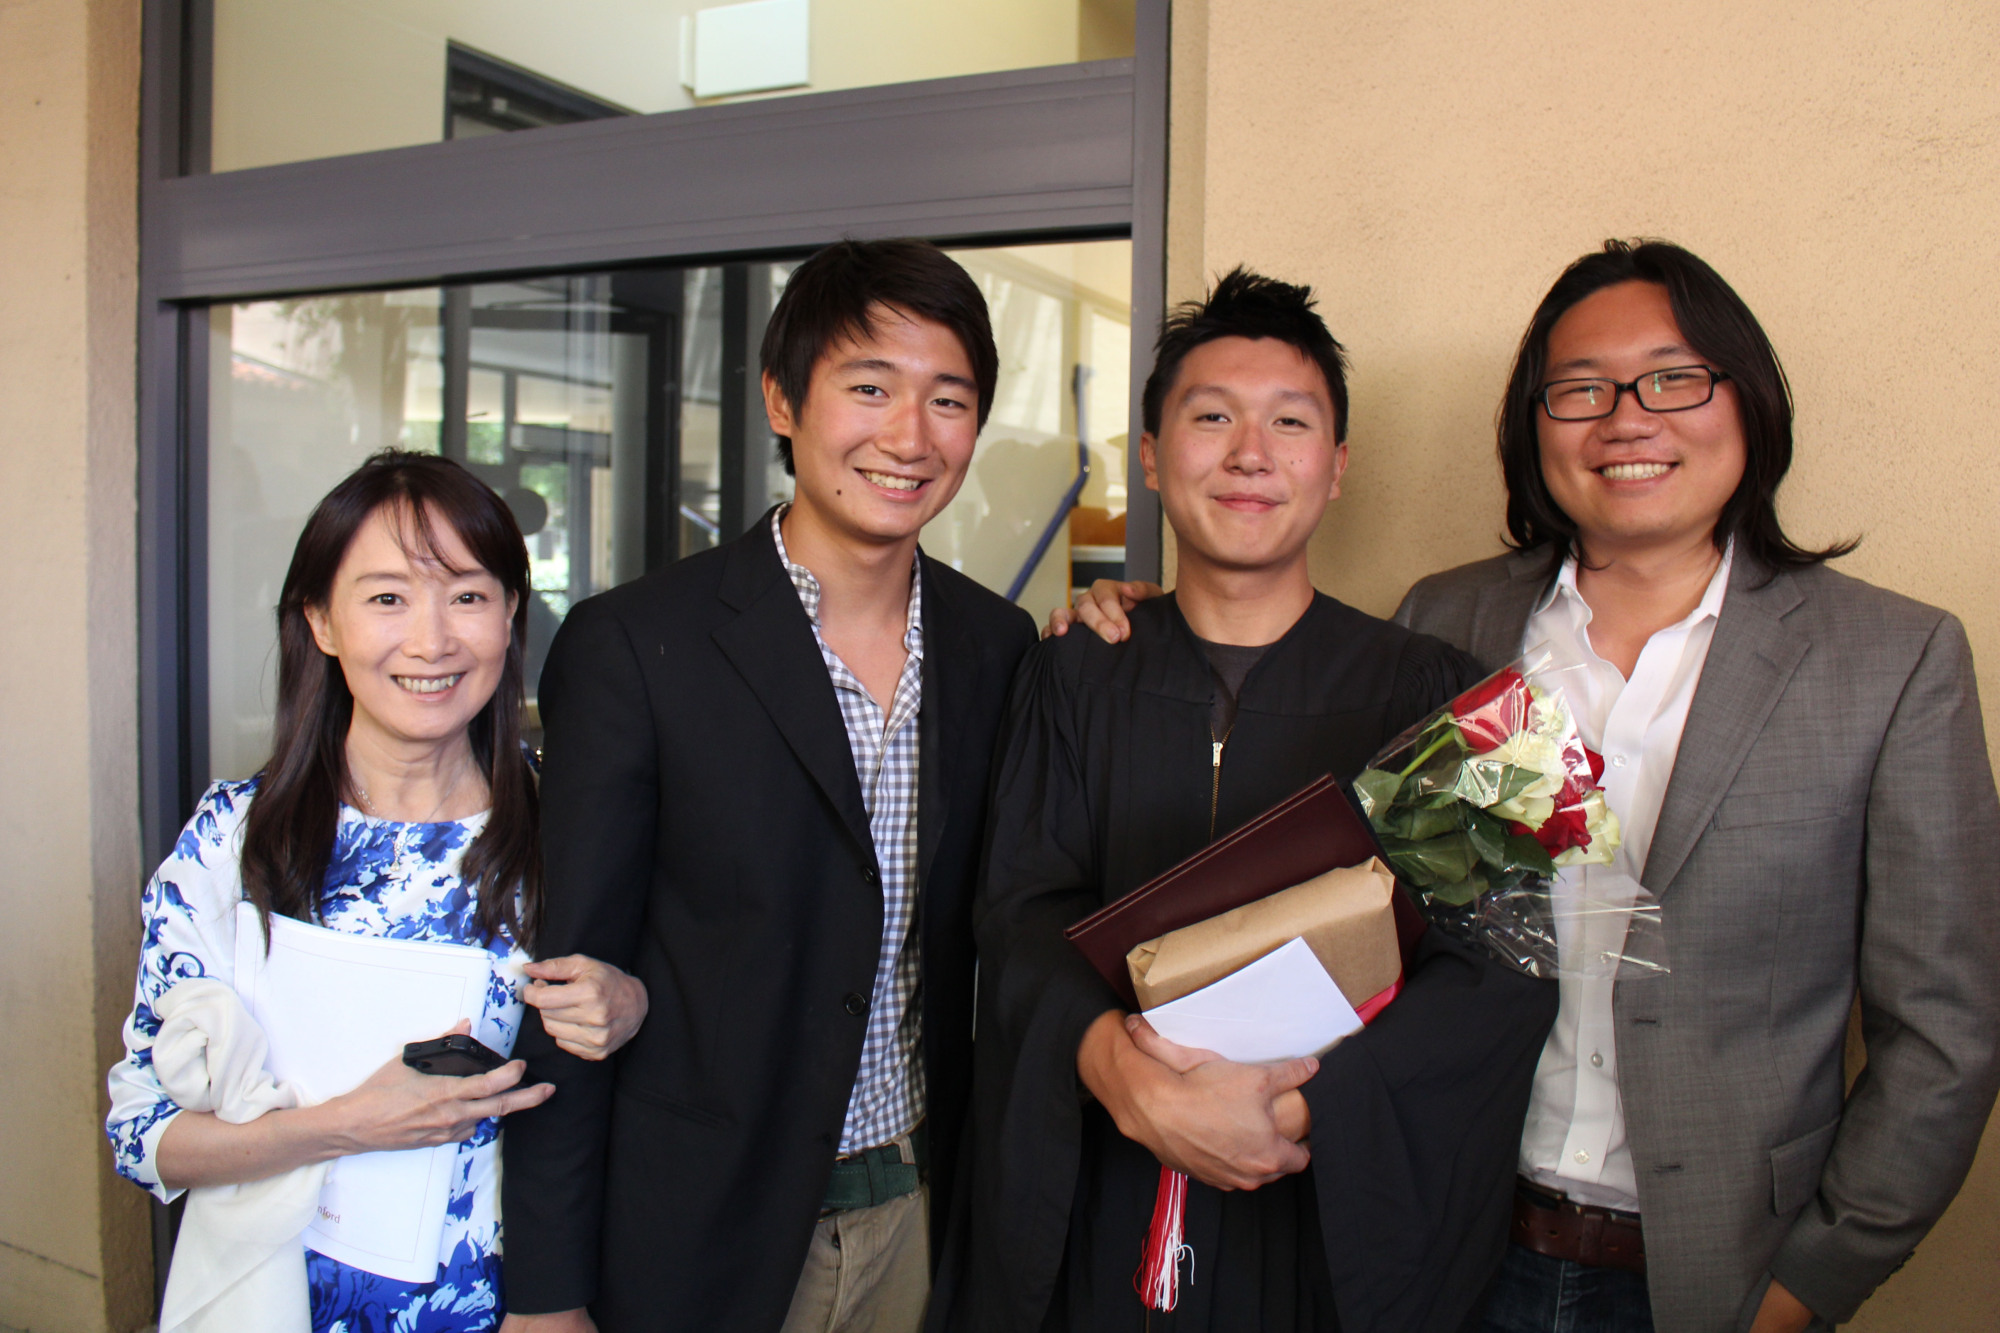 Agnes Chan poses with her three sons at her second son Shohei's graduation ceremony at Stanford University in 2015. | COURTESY OF T&AMP;A / VIA KYODO